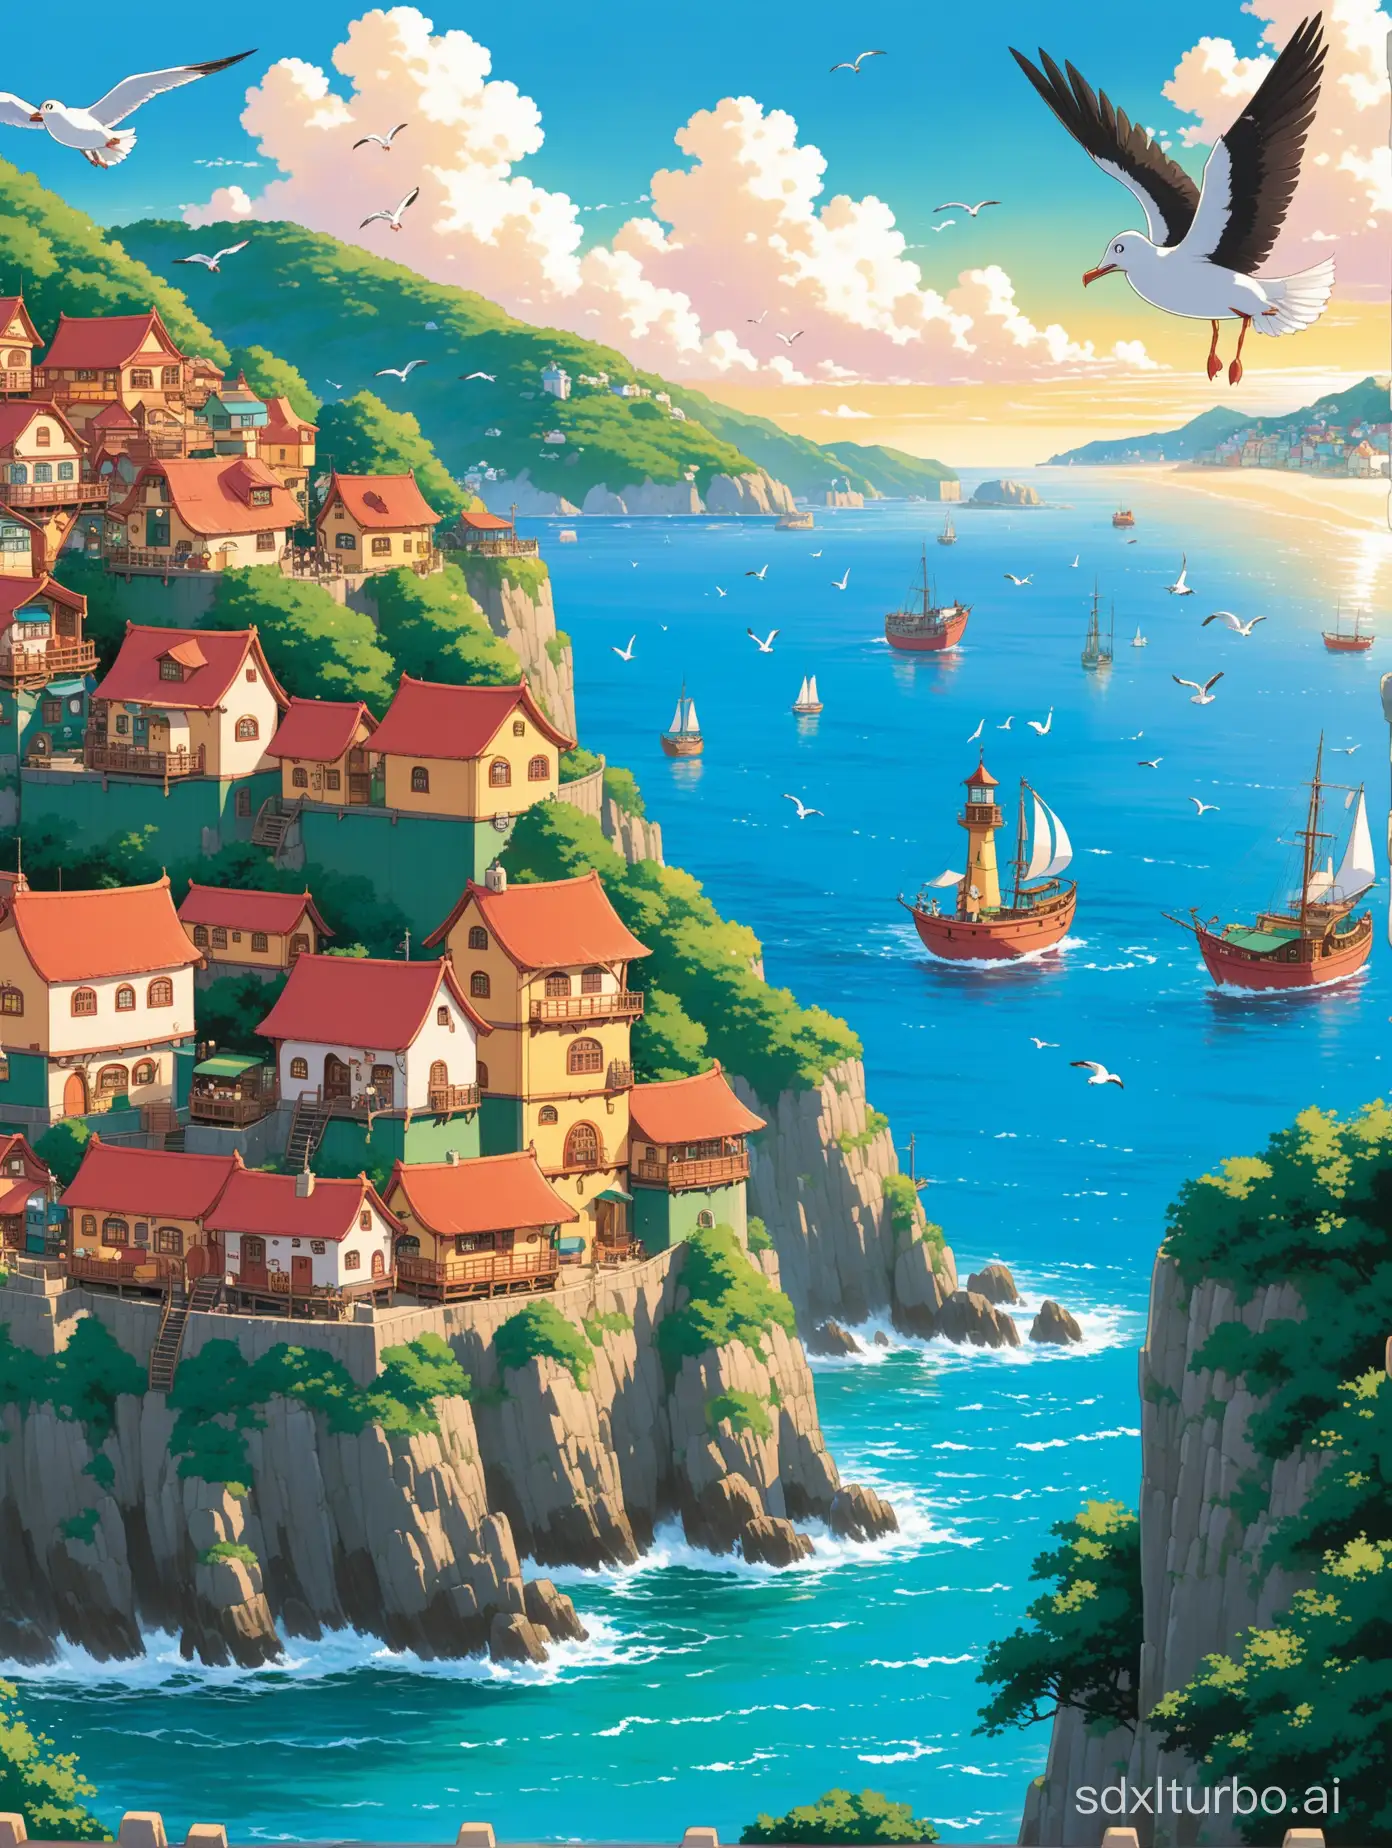 Ghibli's Whimsical Seaside Village: A charming seaside village perched atop cliffs overlooking the ocean, its colorful buildings adorned with intricate carvings and whimsical details. Fishing boats bob gently in the harbor, while seagulls soar overhead, creating a scene straight out of a Studio Ghibli masterpiece like "Kiki's Delivery Service."